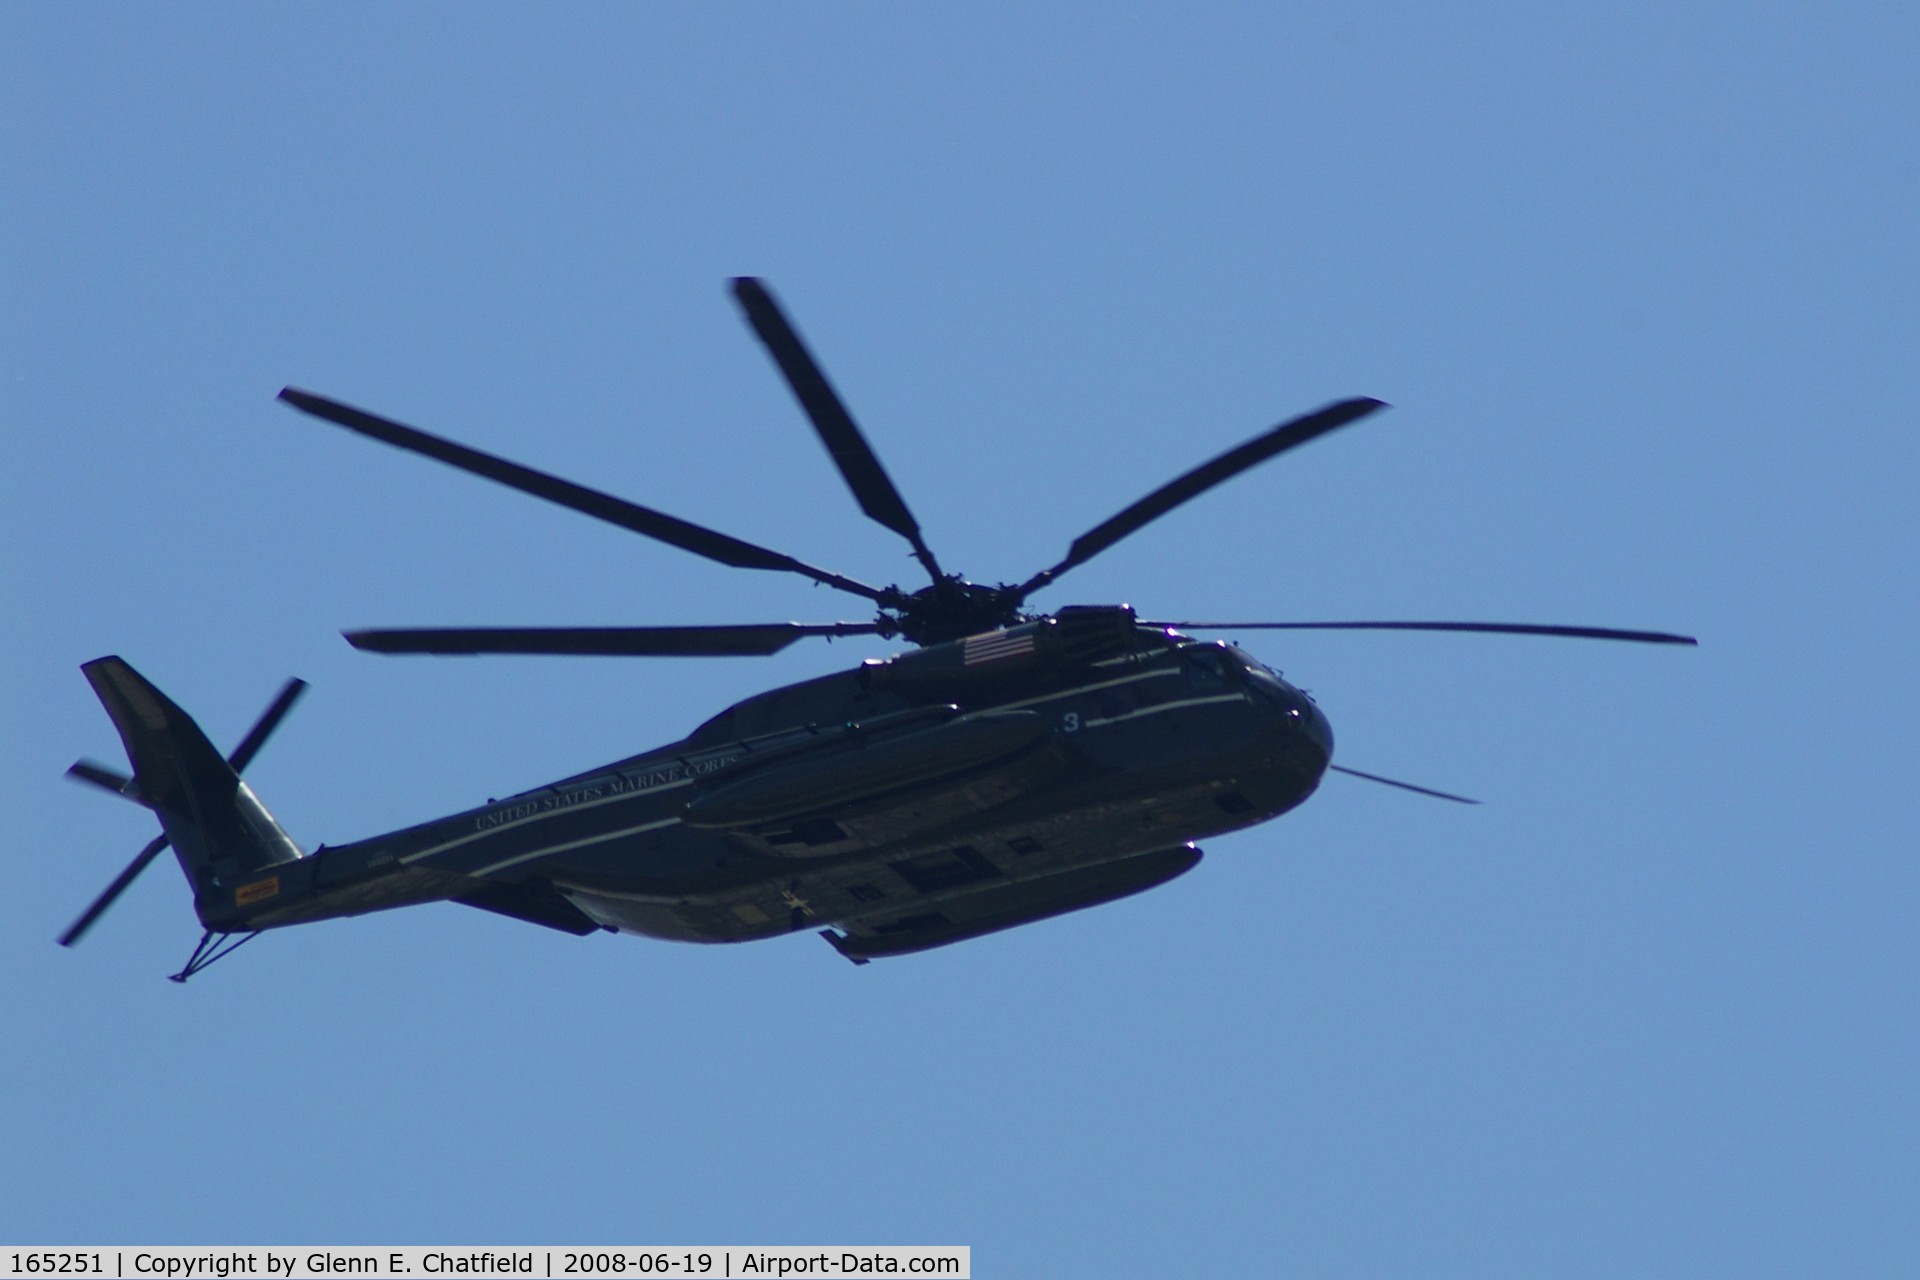 165251, Sikorsky CH-53E Super Stallion C/N 65-645, Flying over North Liberty, IA as part of Presidential fleet.